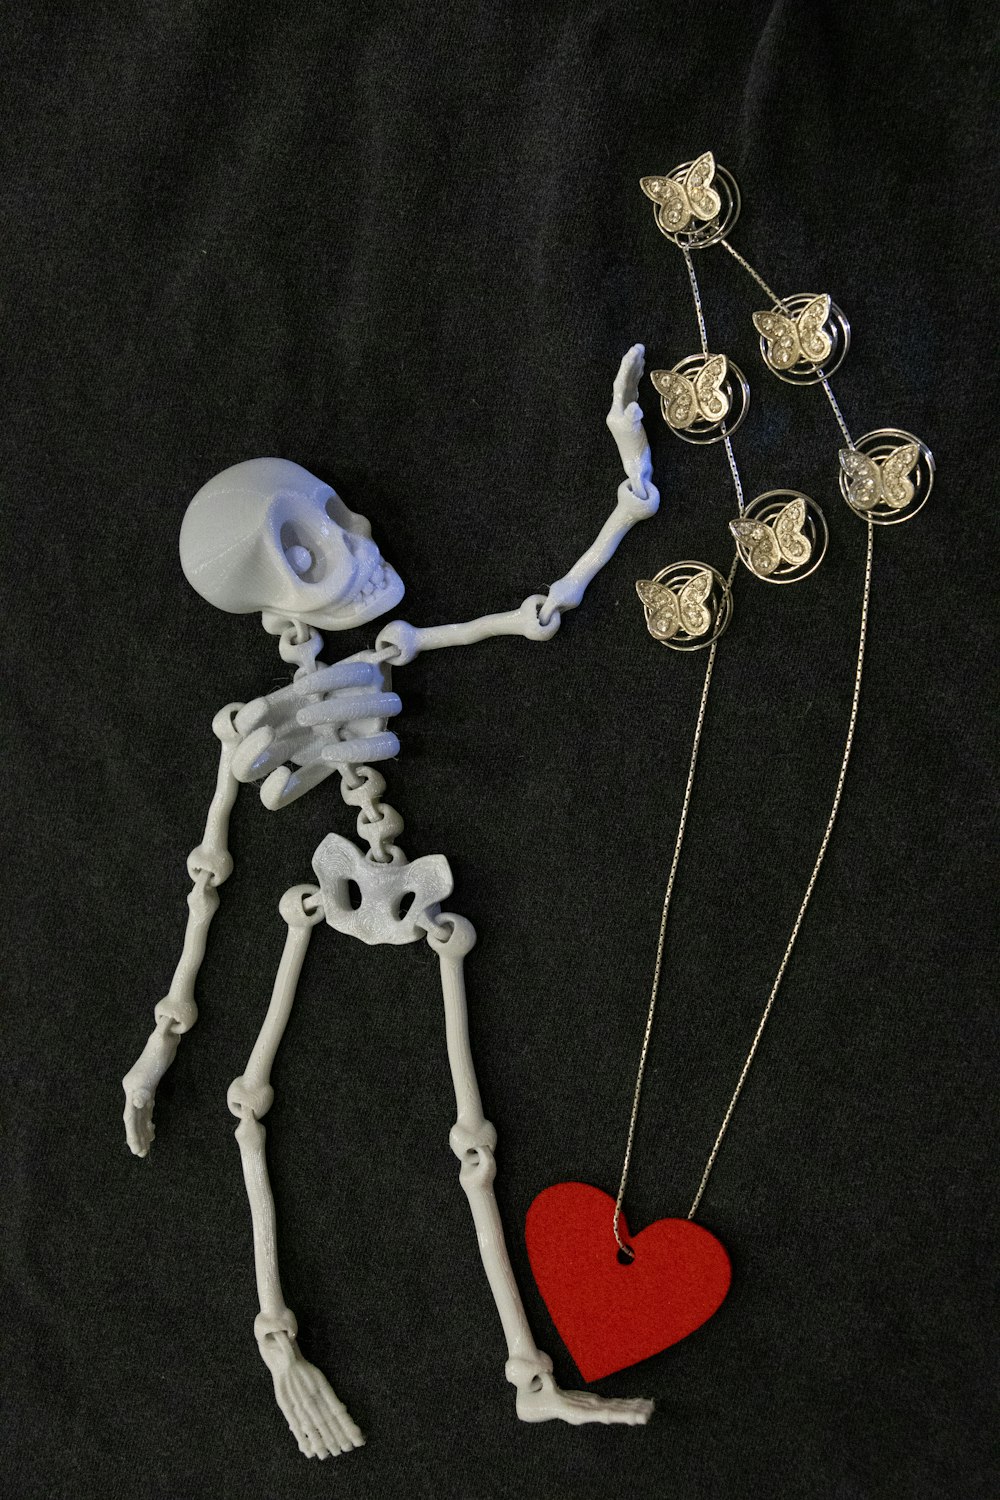 a skeleton holding a red heart on a black background